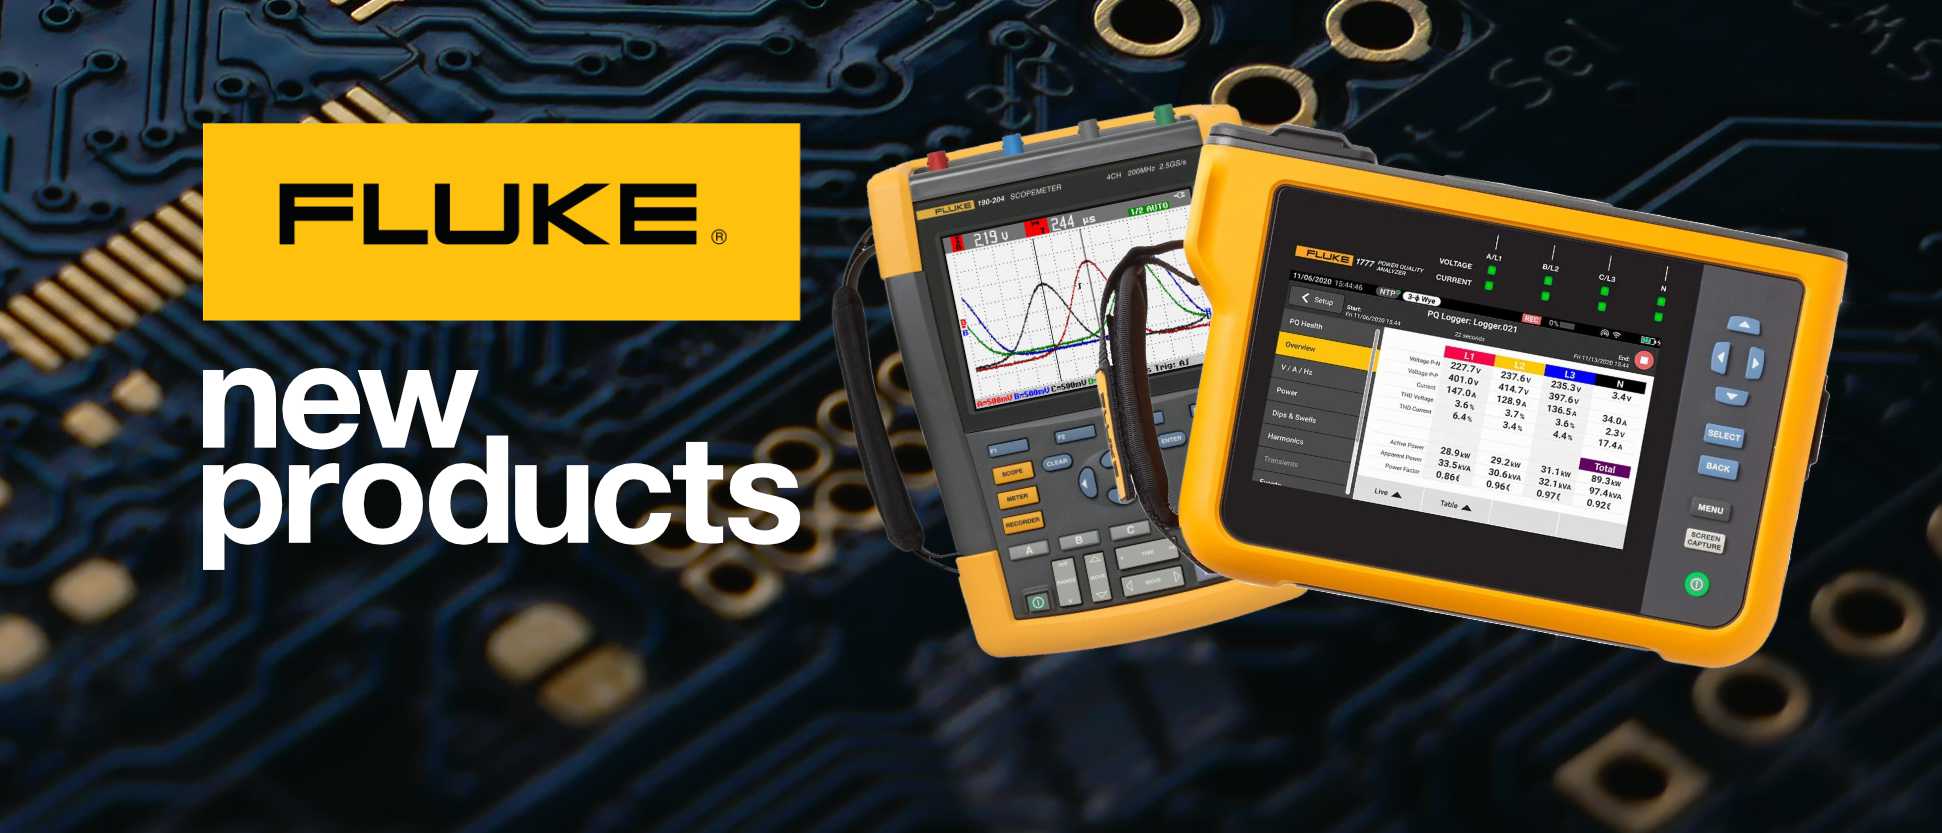 All new Products from Fluke